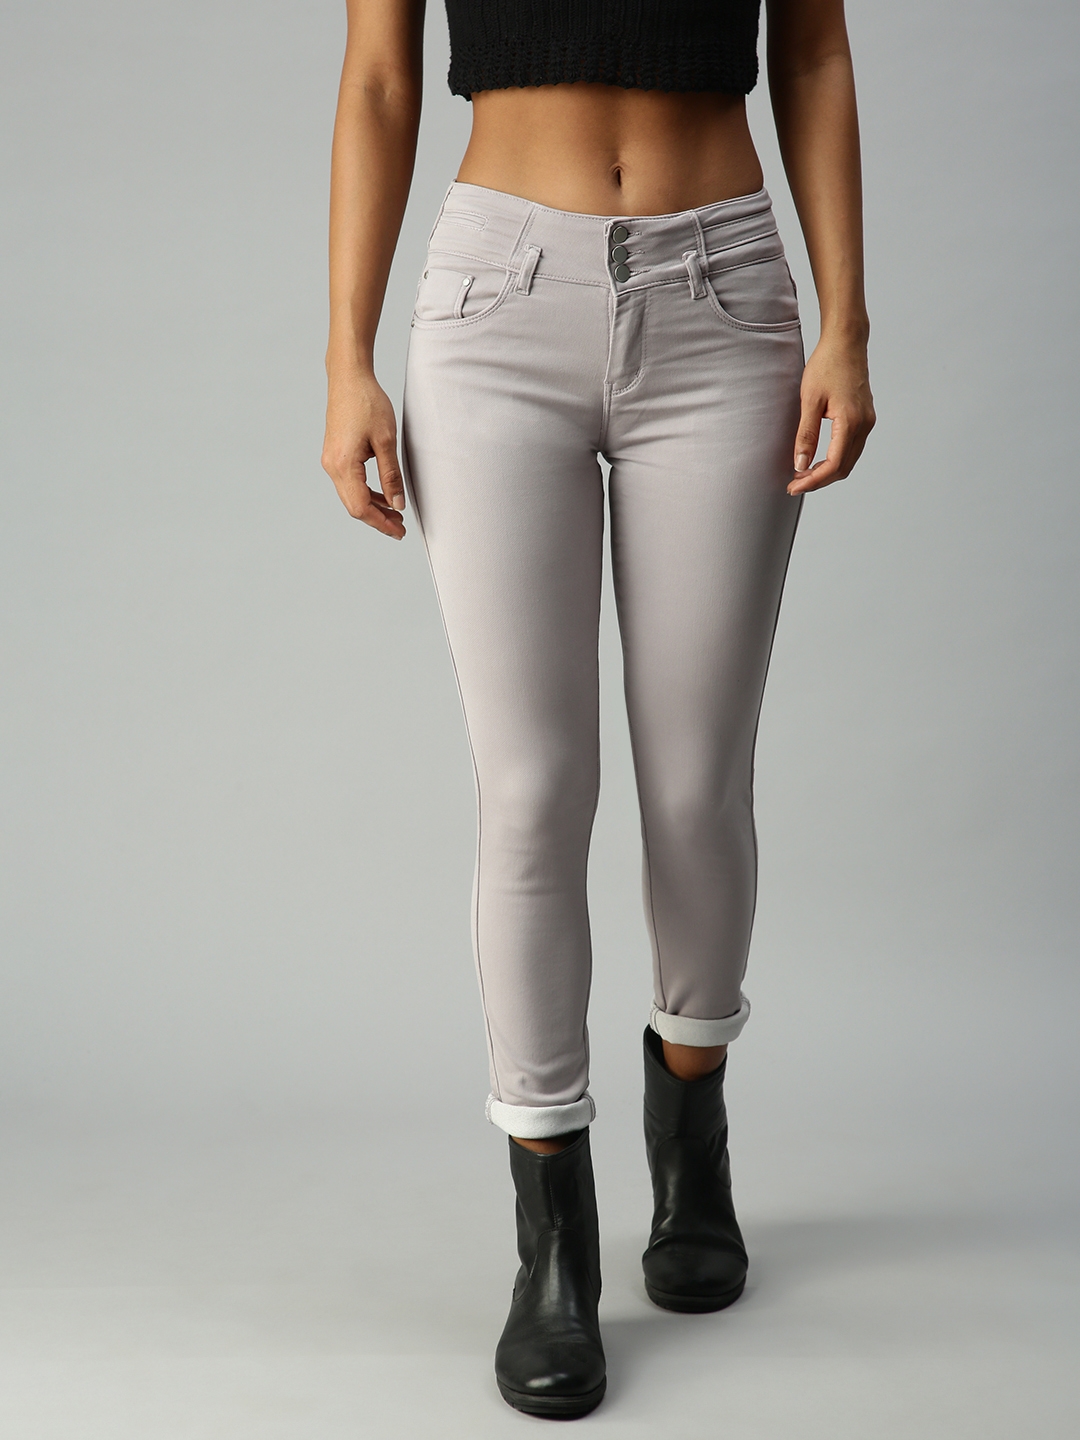 Showoff | SHOWOFF Women's Skinny Fit Clean Look grey Jeans